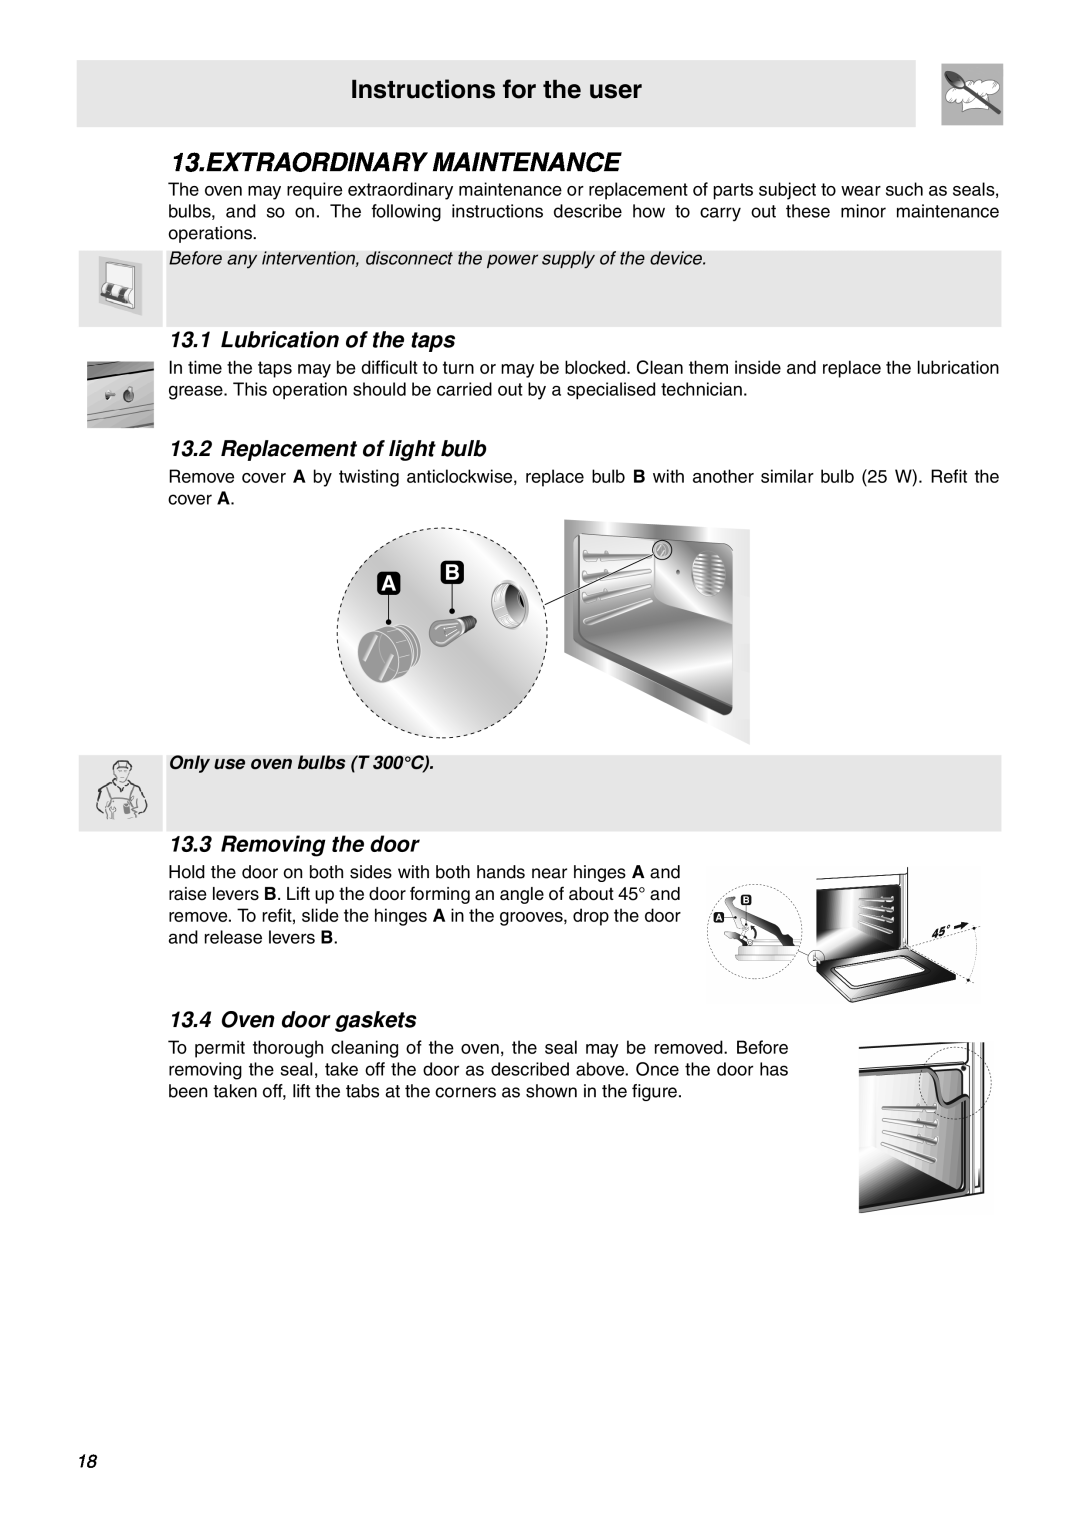 Smeg SNZ106VML manual Extraordinary Maintenance, Lubrication of the taps, Replacement of light bulb, Removing the door 